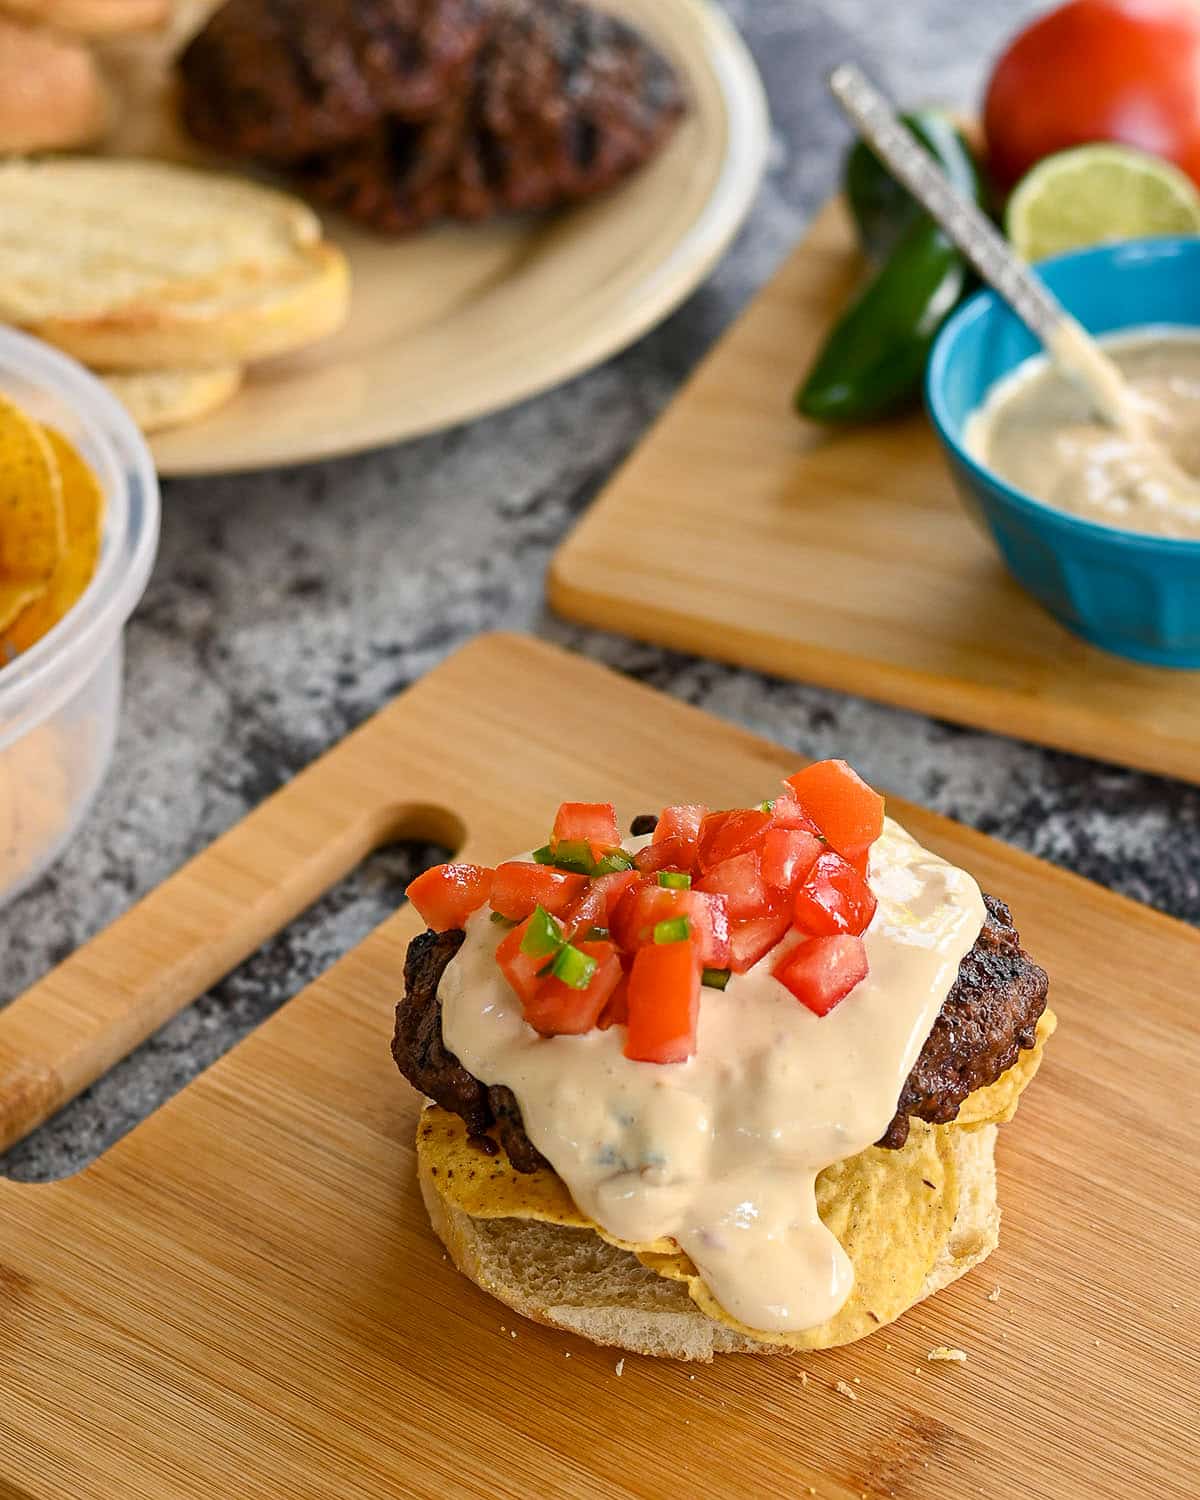 Queso cheese over a hamburger patty topped with tomato and jalapeno.